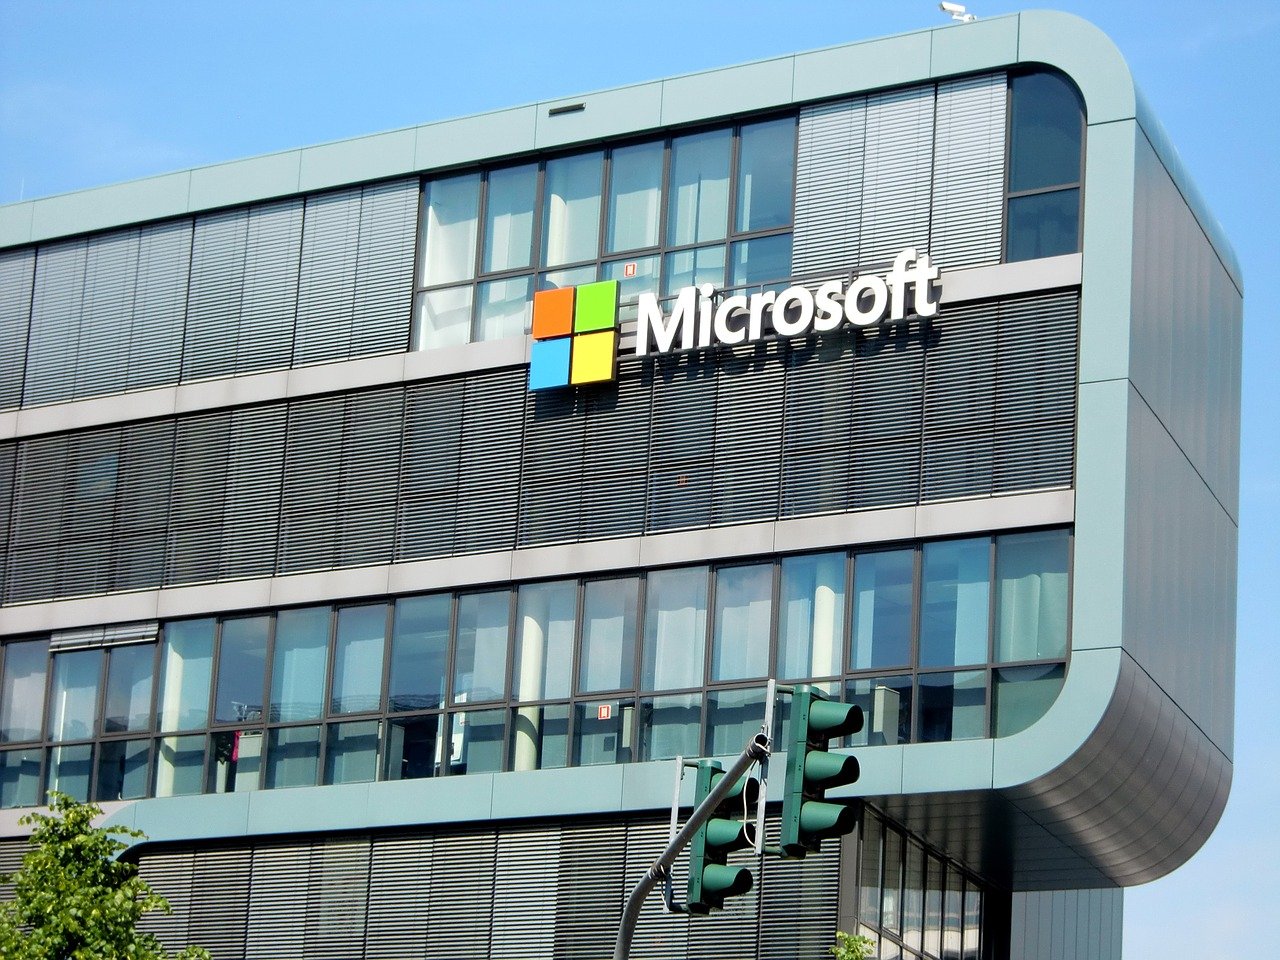 Beware: If you send nude pictures via Microsoft, you might get locked out of your account.